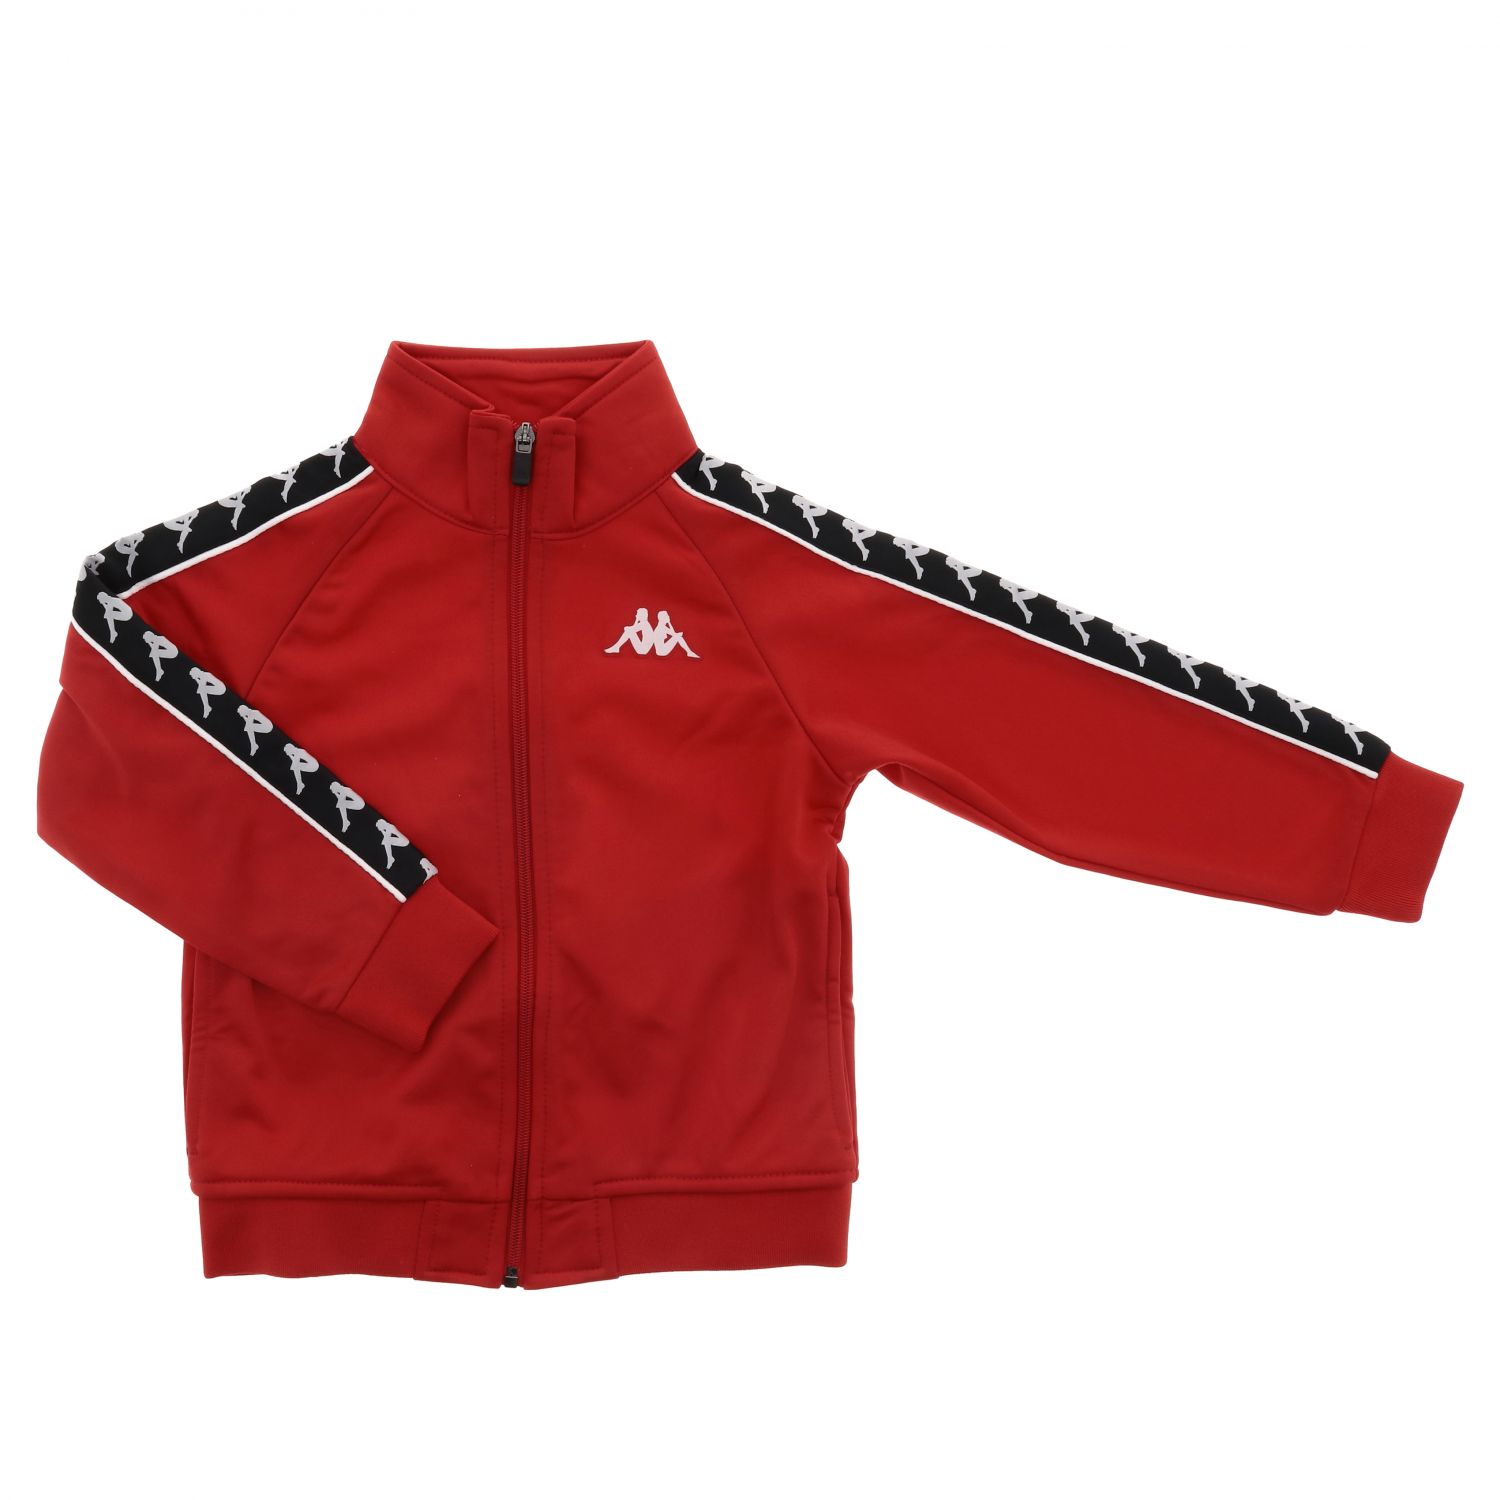 bestrating Voorzichtig mesh Kappa Outlet: sweater for boys - Red | Kappa sweater 301EFU0 online on  GIGLIO.COM